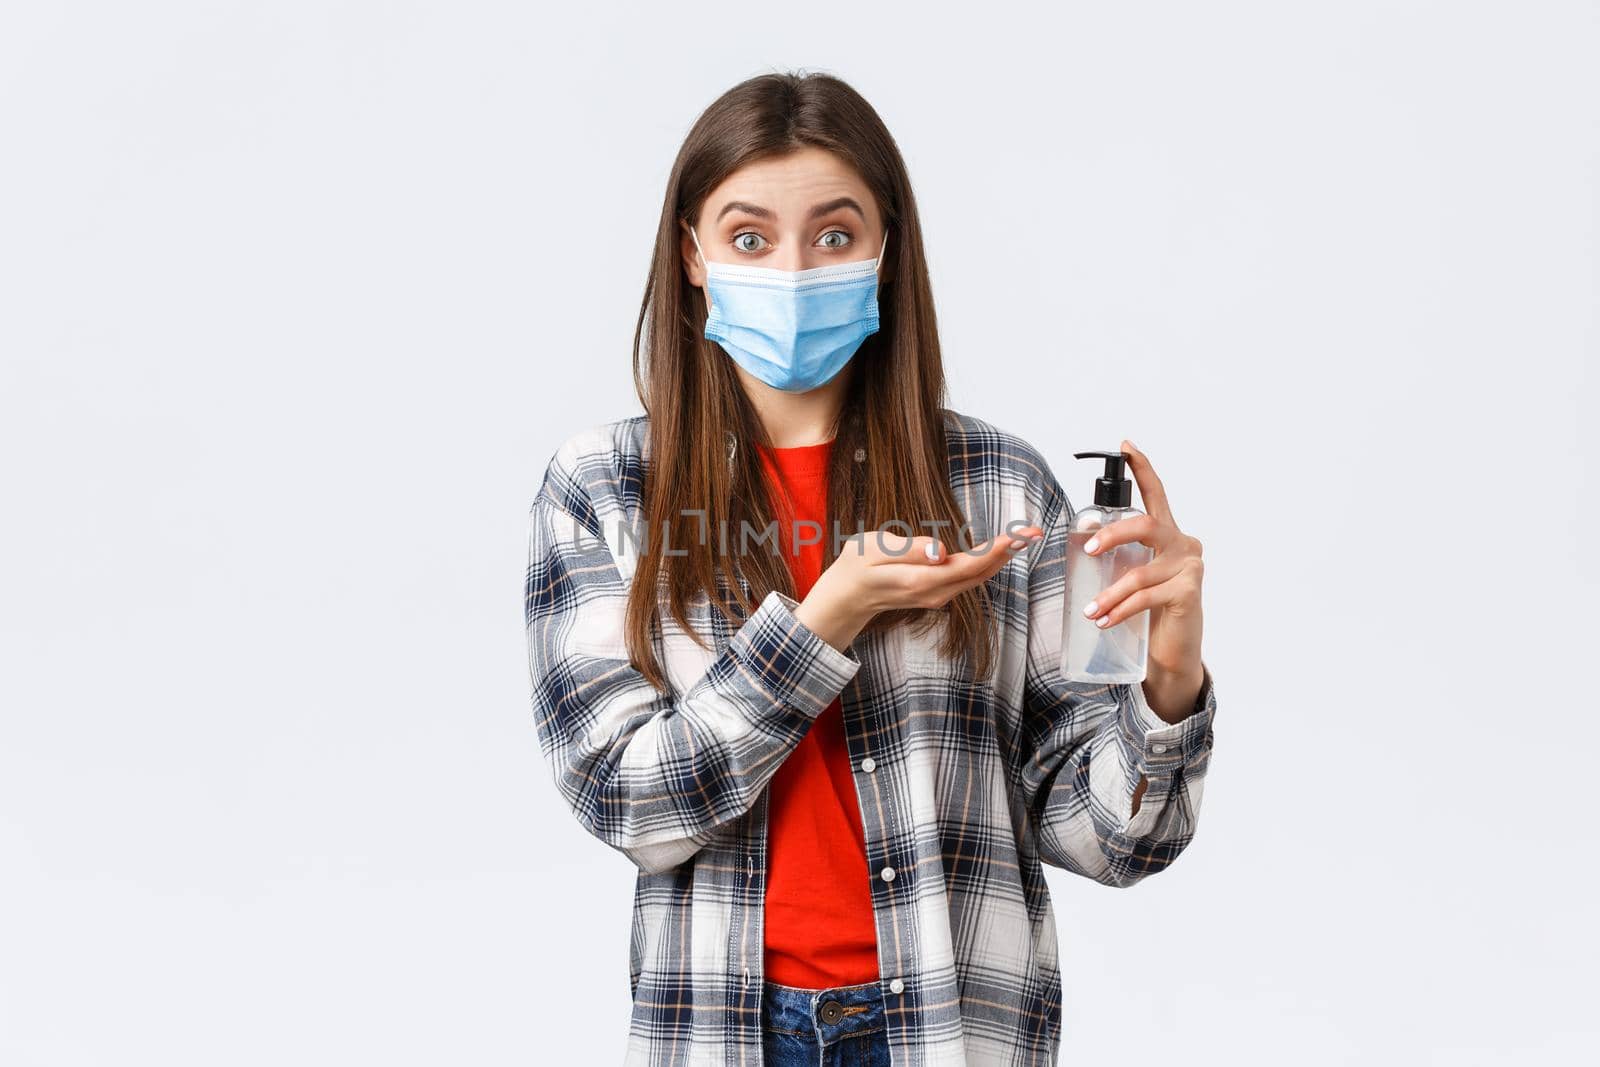 Coronavirus outbreak, leisure on quarantine, social distancing and emotions concept. Smiling girl preventing catching virus, wear medical mask and apply hand sanitizer, white background by Benzoix